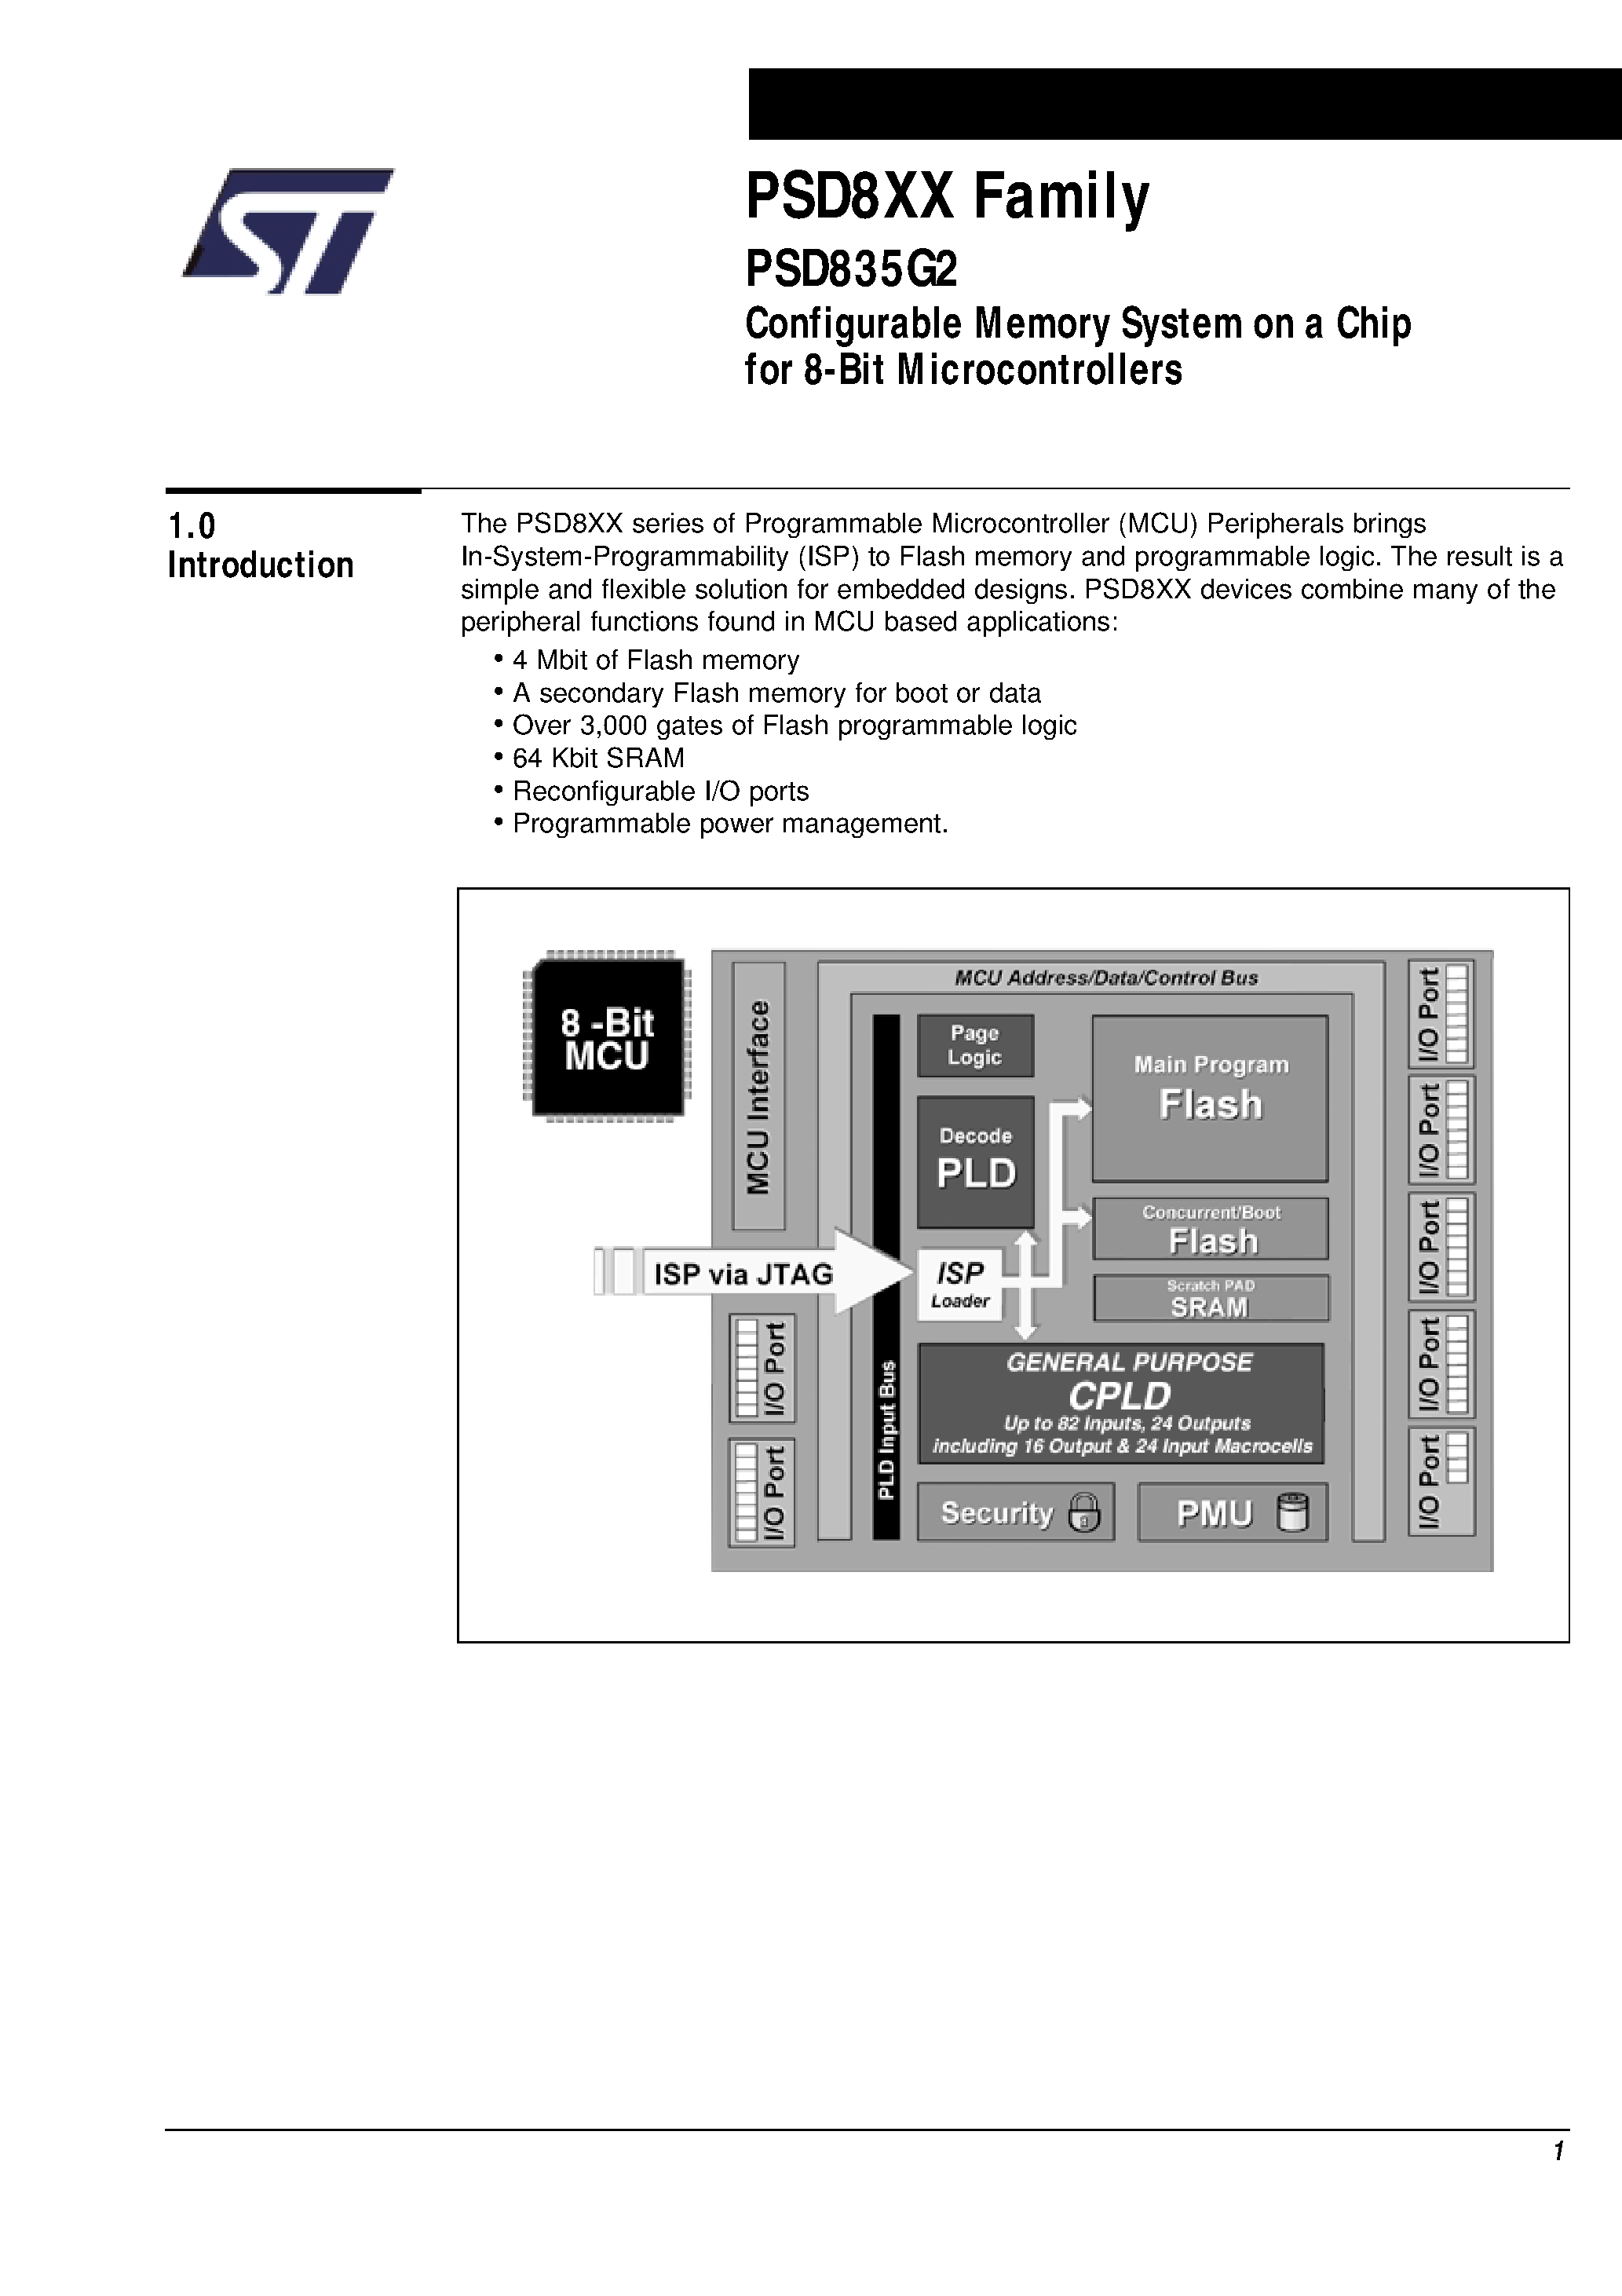 Datasheet PSD835F2-A-12M - Configurable Memory System on a Chip for 8-Bit Microcontrollers page 2